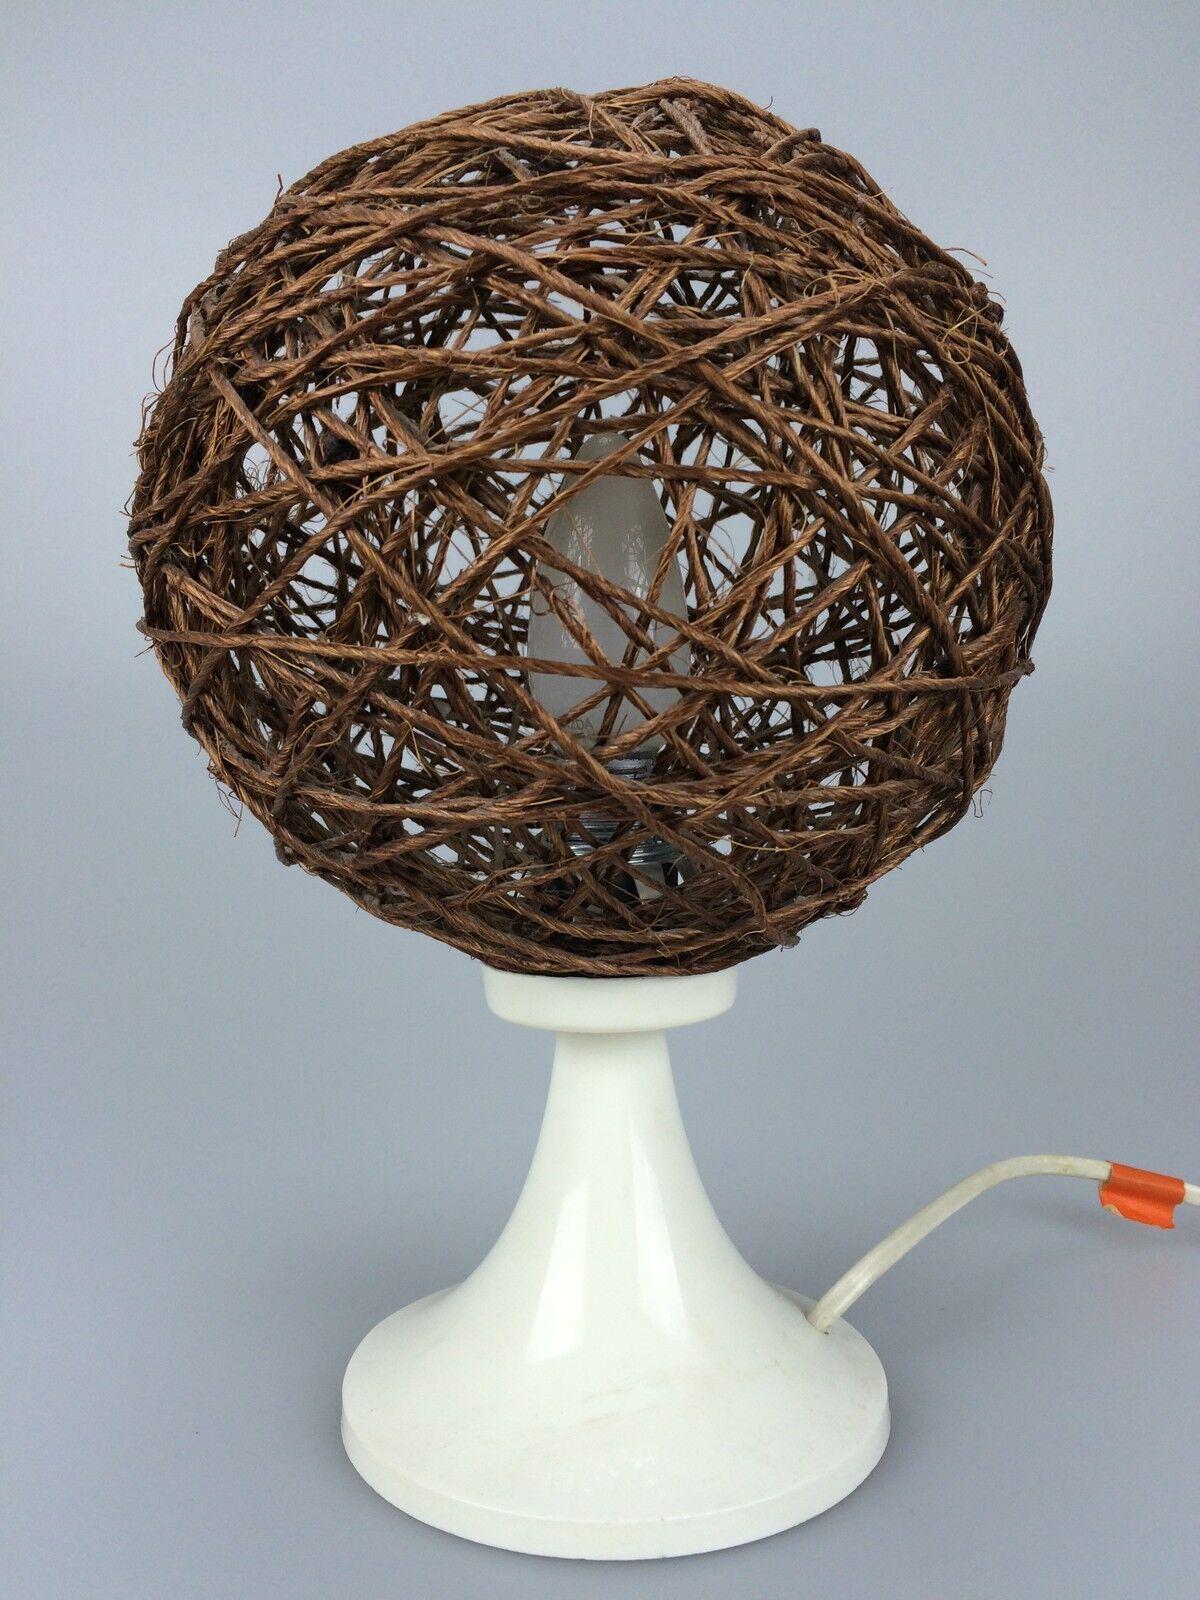 60s 70s Ball lamp light table lamp bedside lamp space age design.

Object: spherical lamp

Manufacturer:

Condition: good

Age: around 1960-1970

Dimensions:

Diameter = 19cm
Height = 28cm

Other notes:

The pictures serve as part